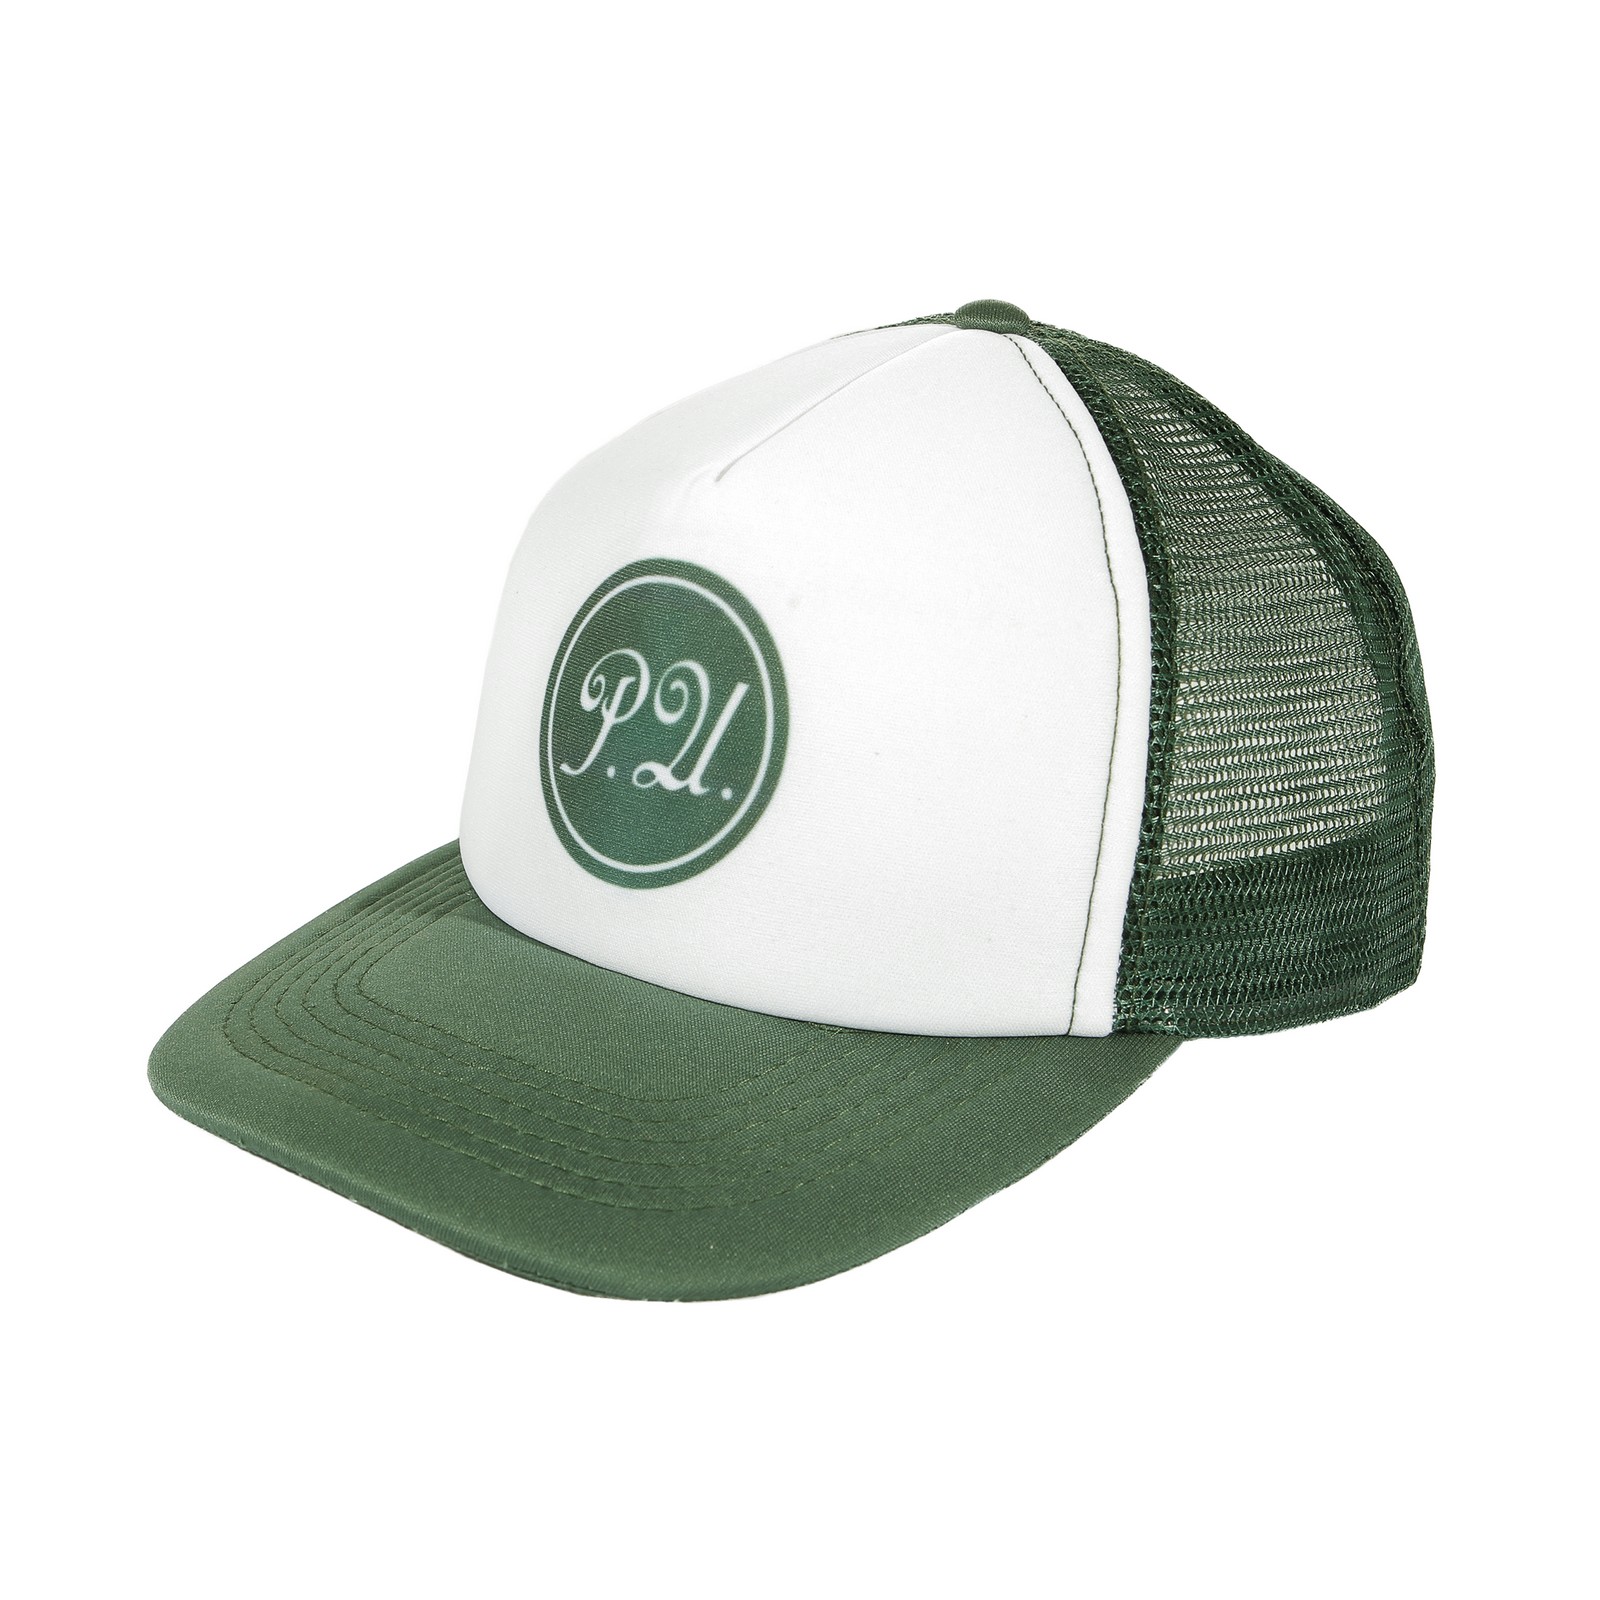 Green cap with own design